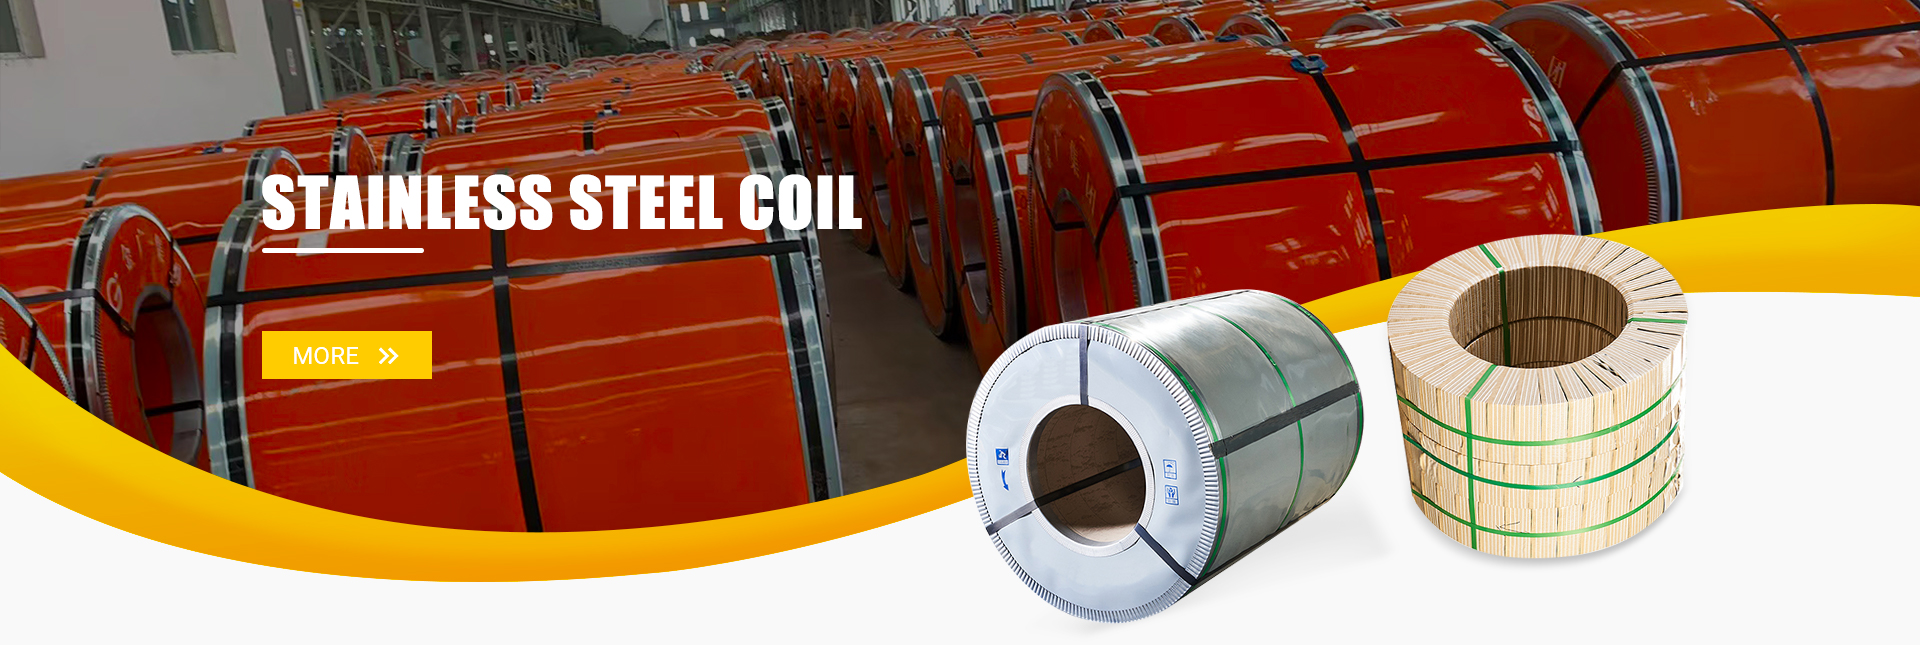 Stainless Steel Coils, Exhaust Flex Tube, Stainless Steel Plates - Xinjing